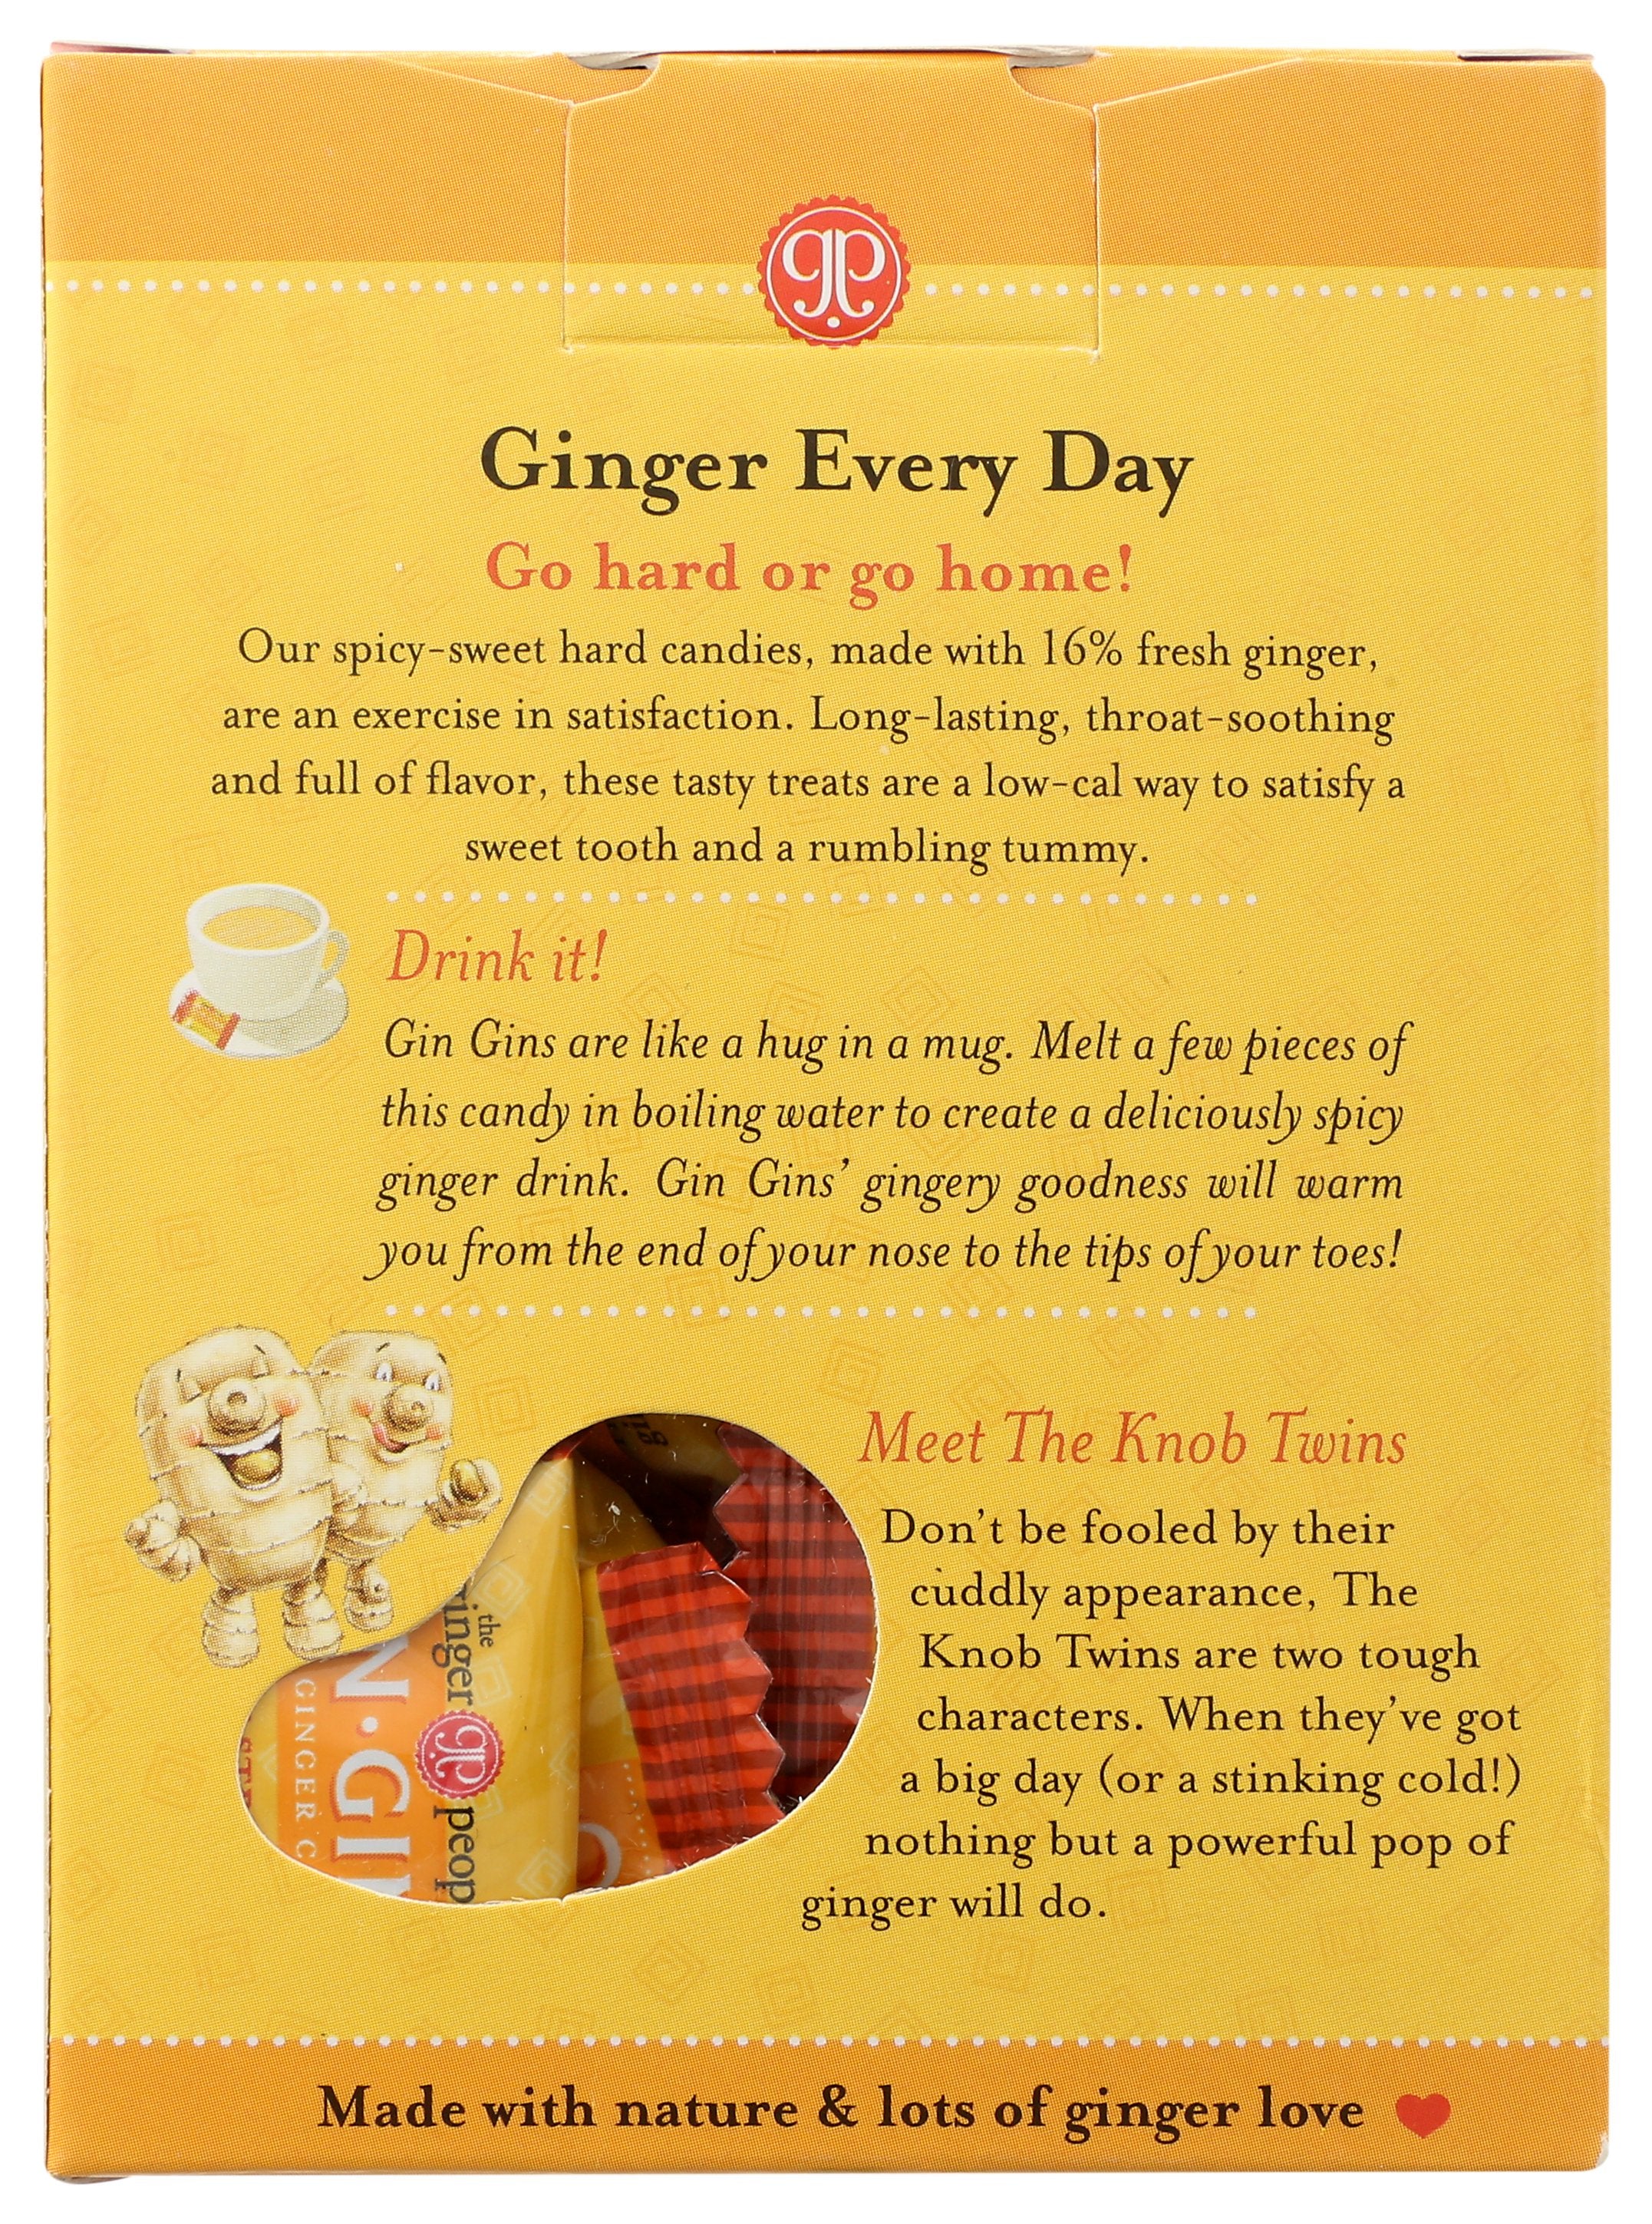 GINGER PEOPLE GNGR HARD CANDY BOX - Case of 12